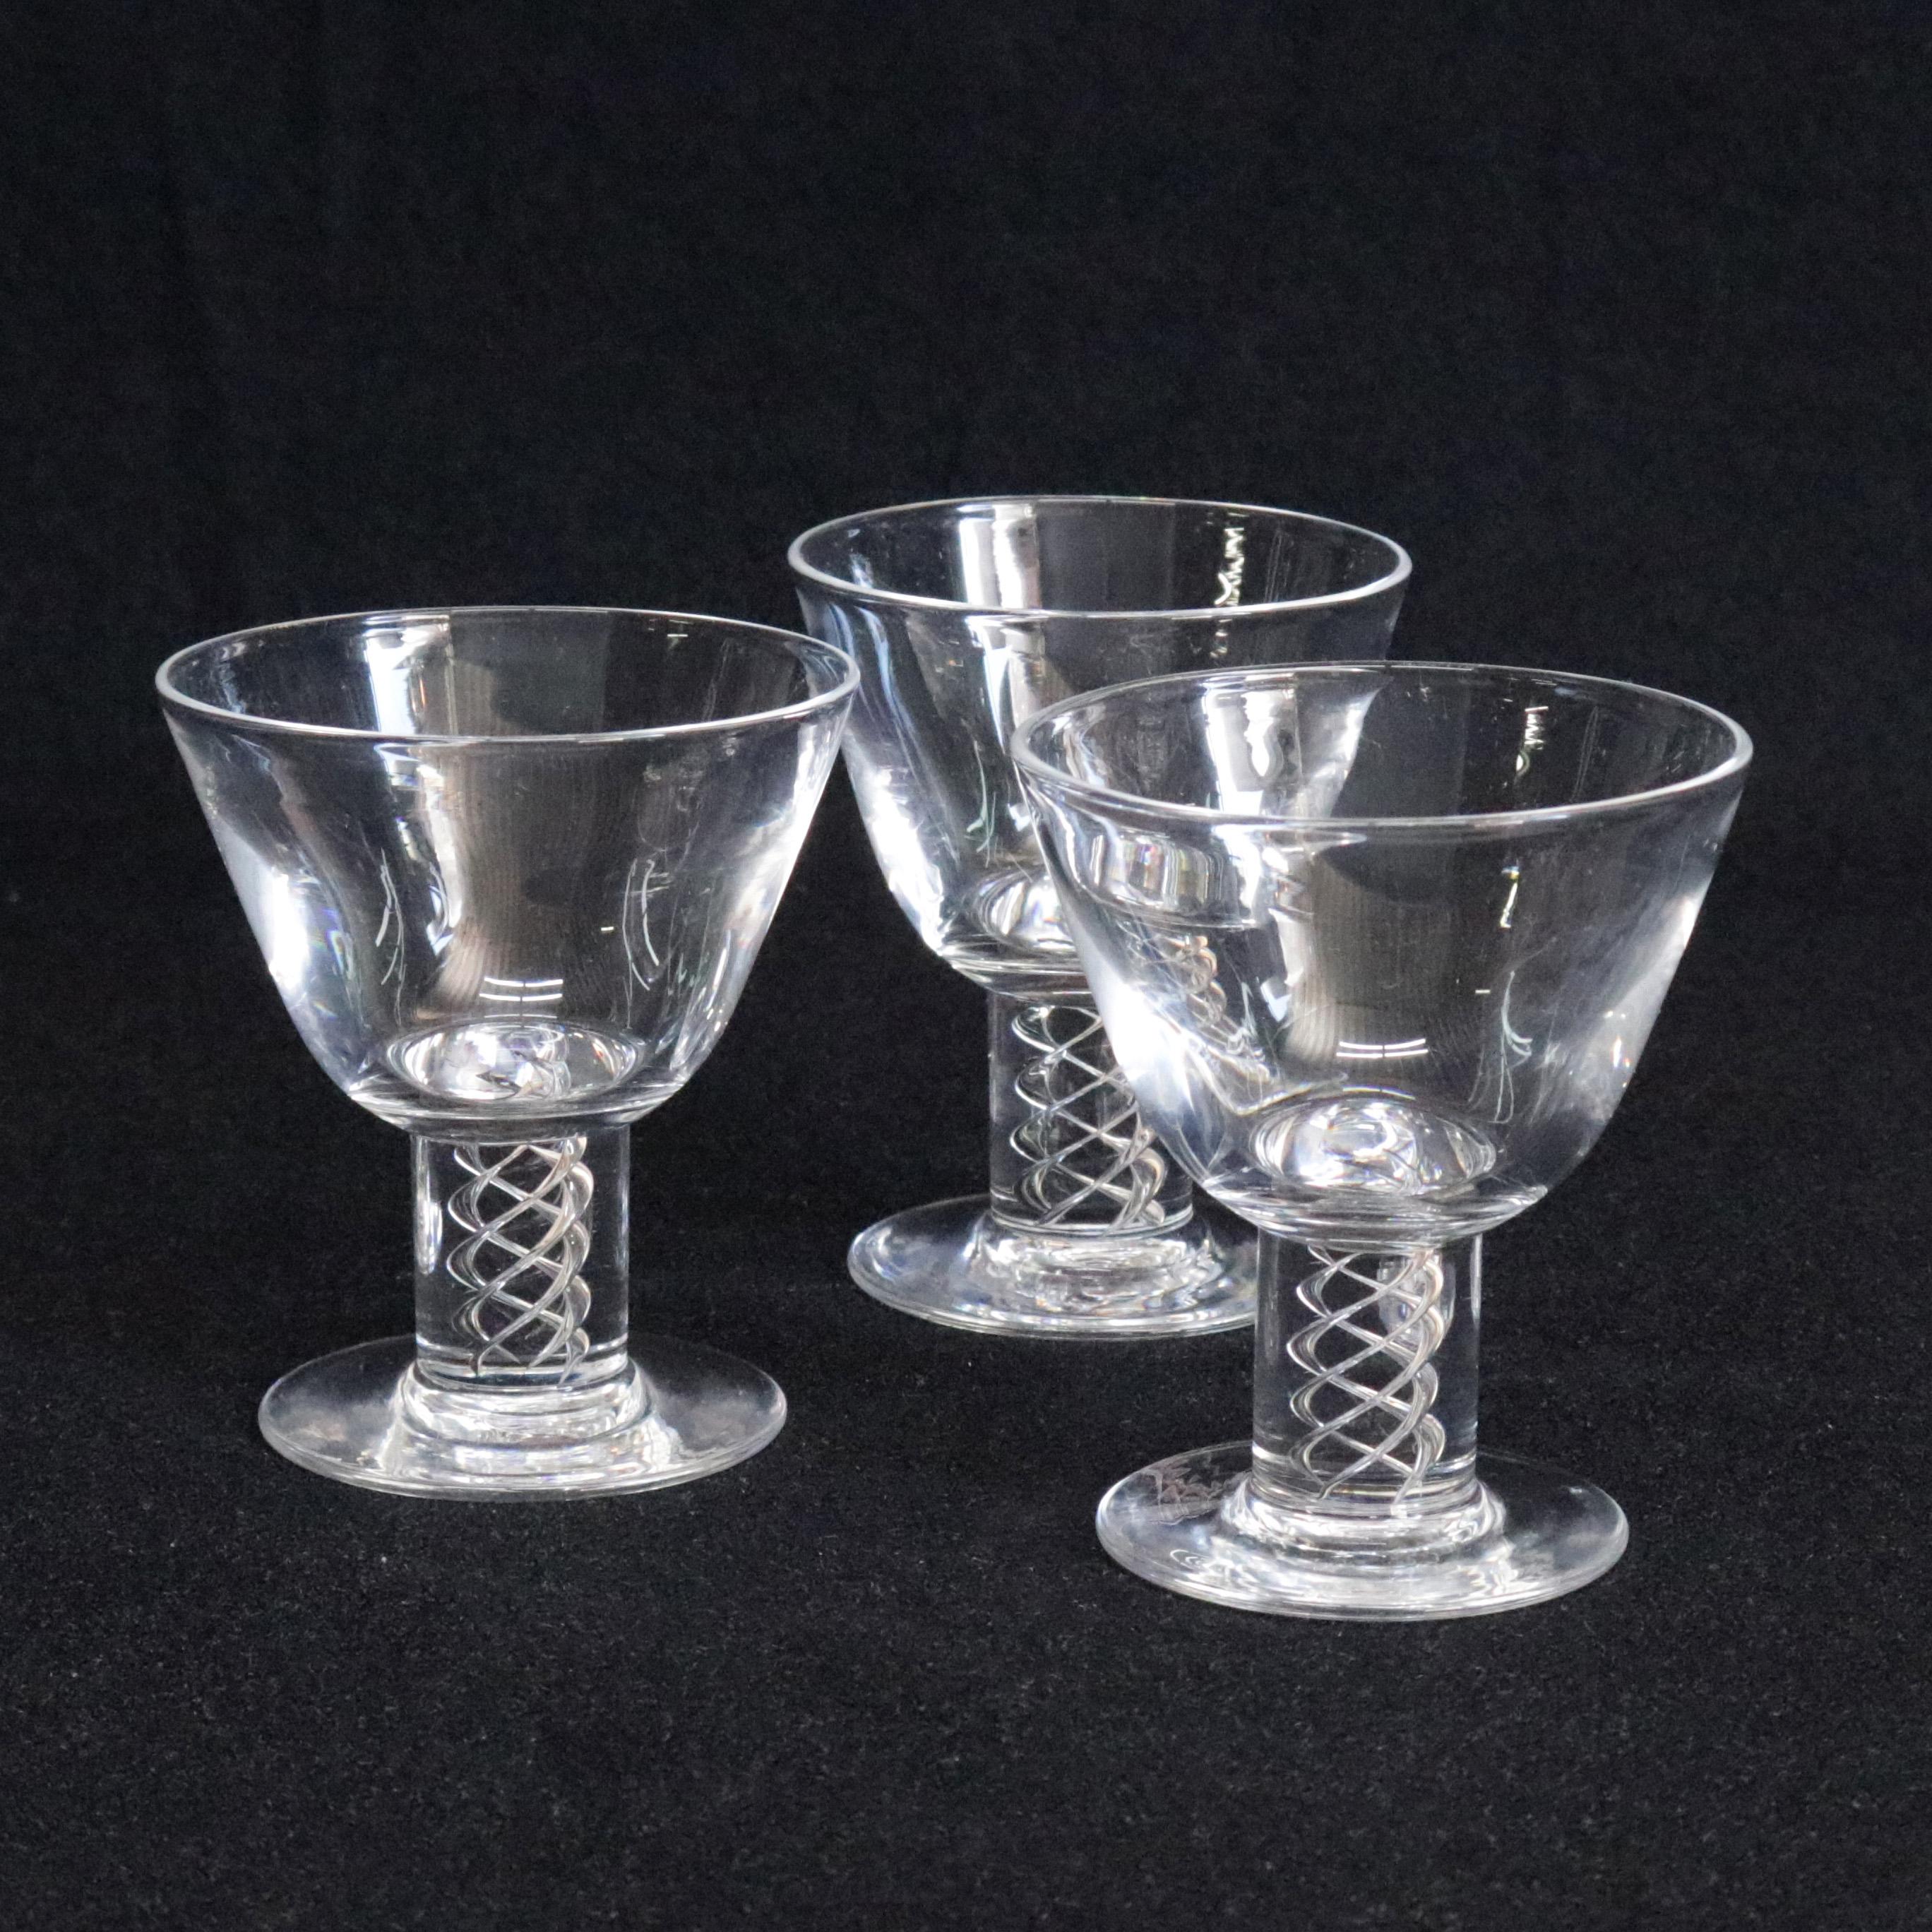 A set of three midcentury Steuben mouth blown crystal aperitif glasses or goblets feature colorless art glass with flared bowls and stems with air twist spiral designed in 1987 for Corning Museum of Glass, New York, NY, signed on bases, 20th